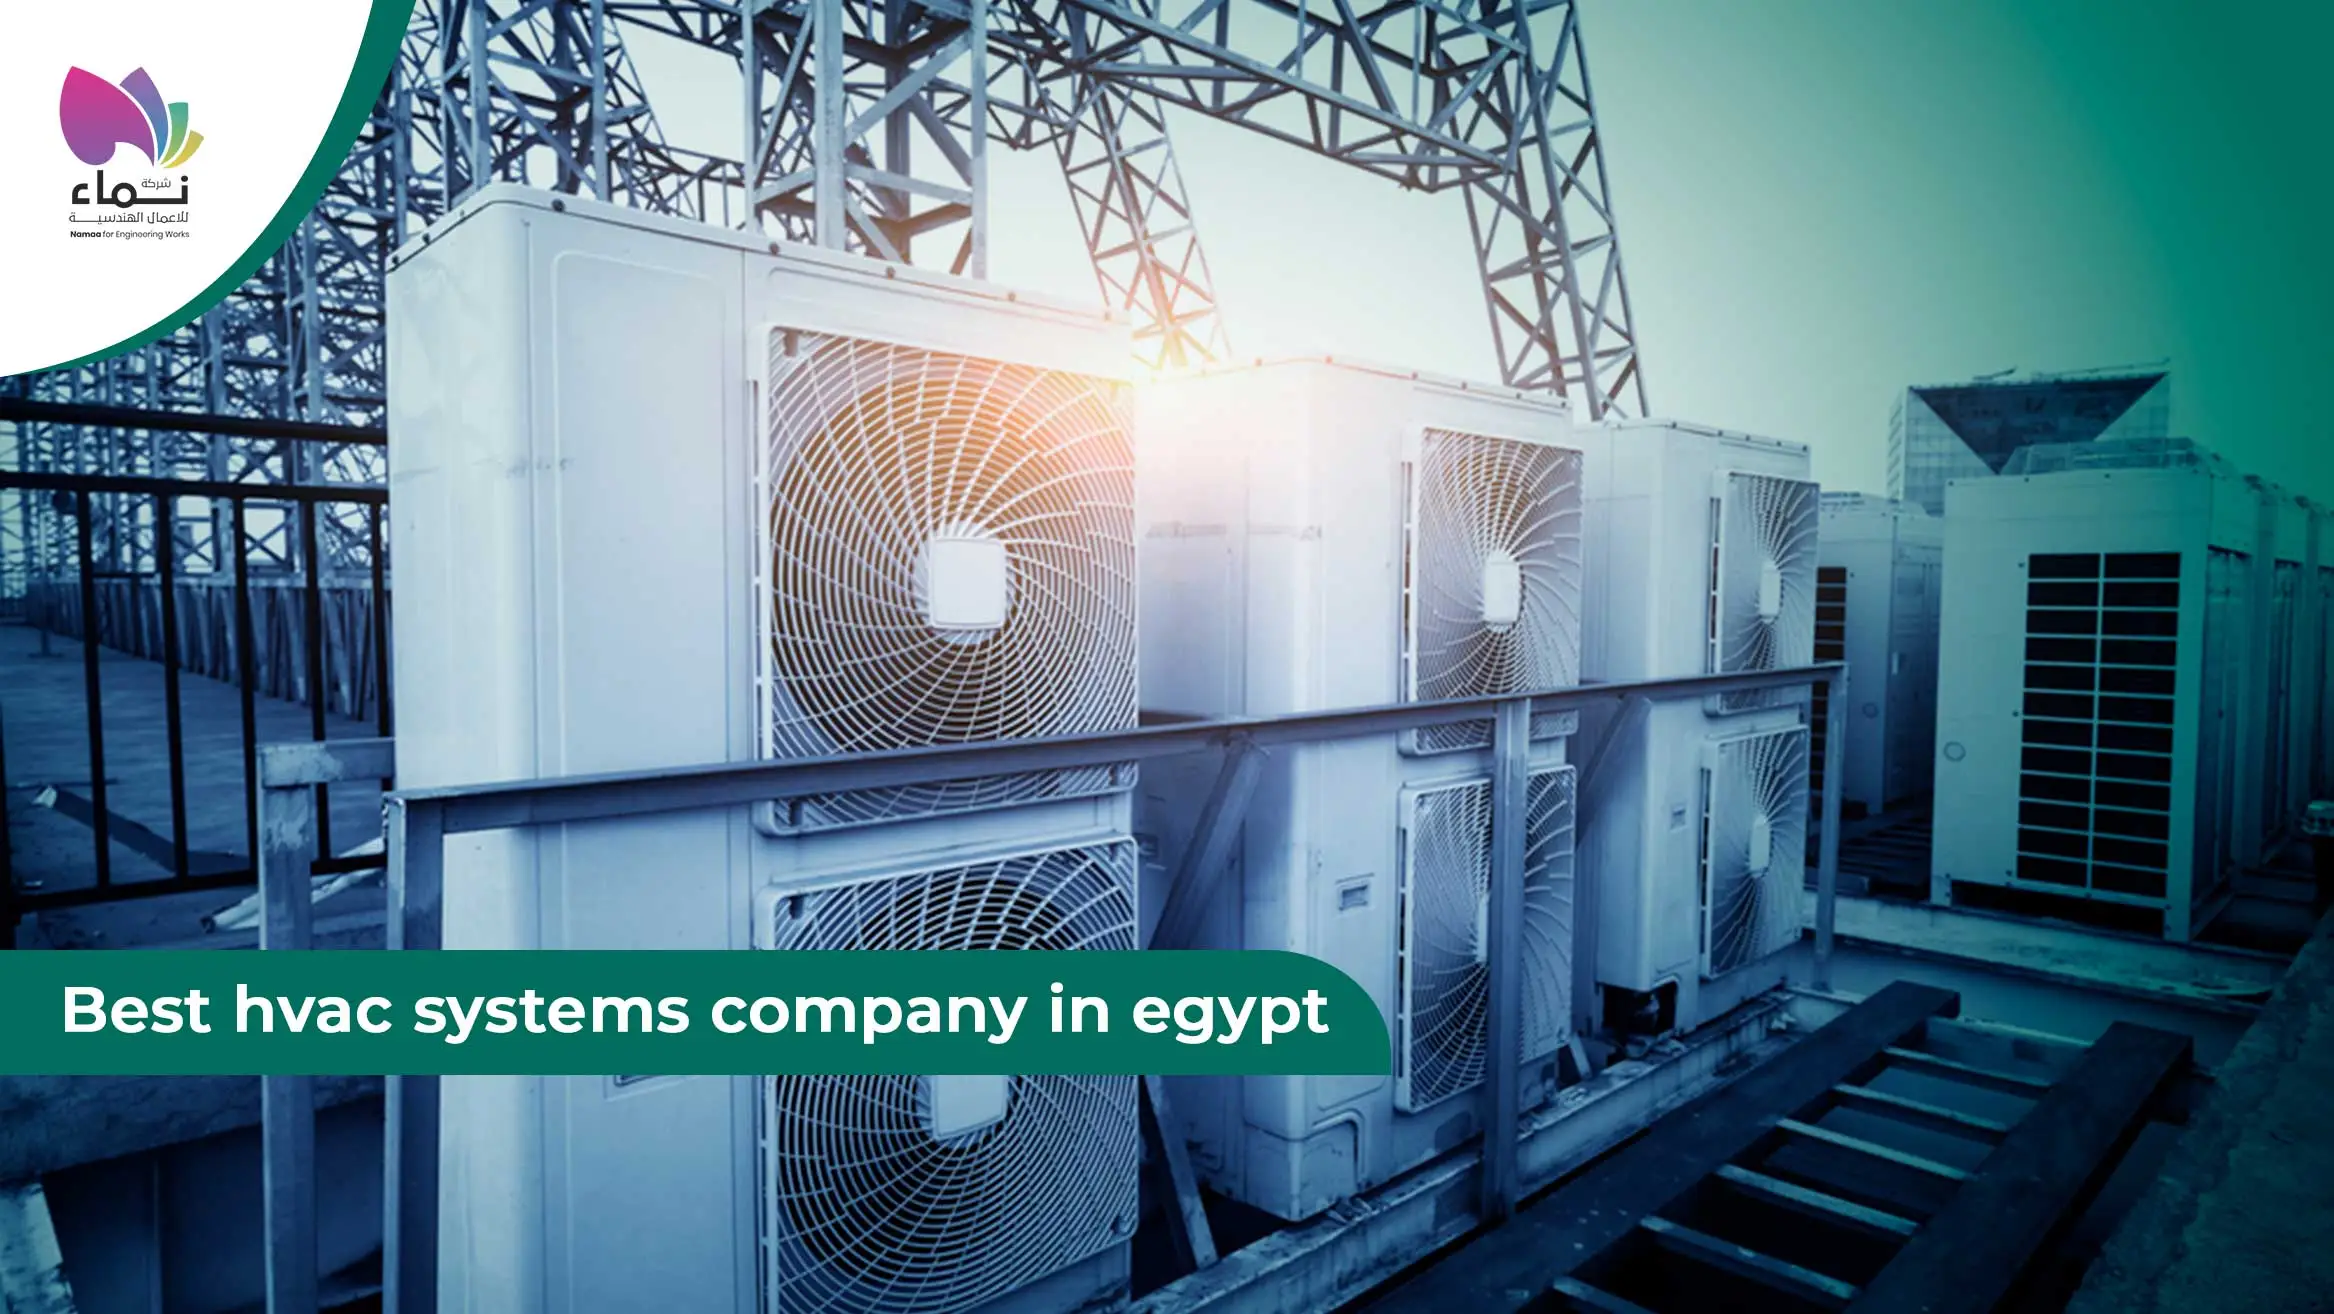 Best hvac systems company in egypt